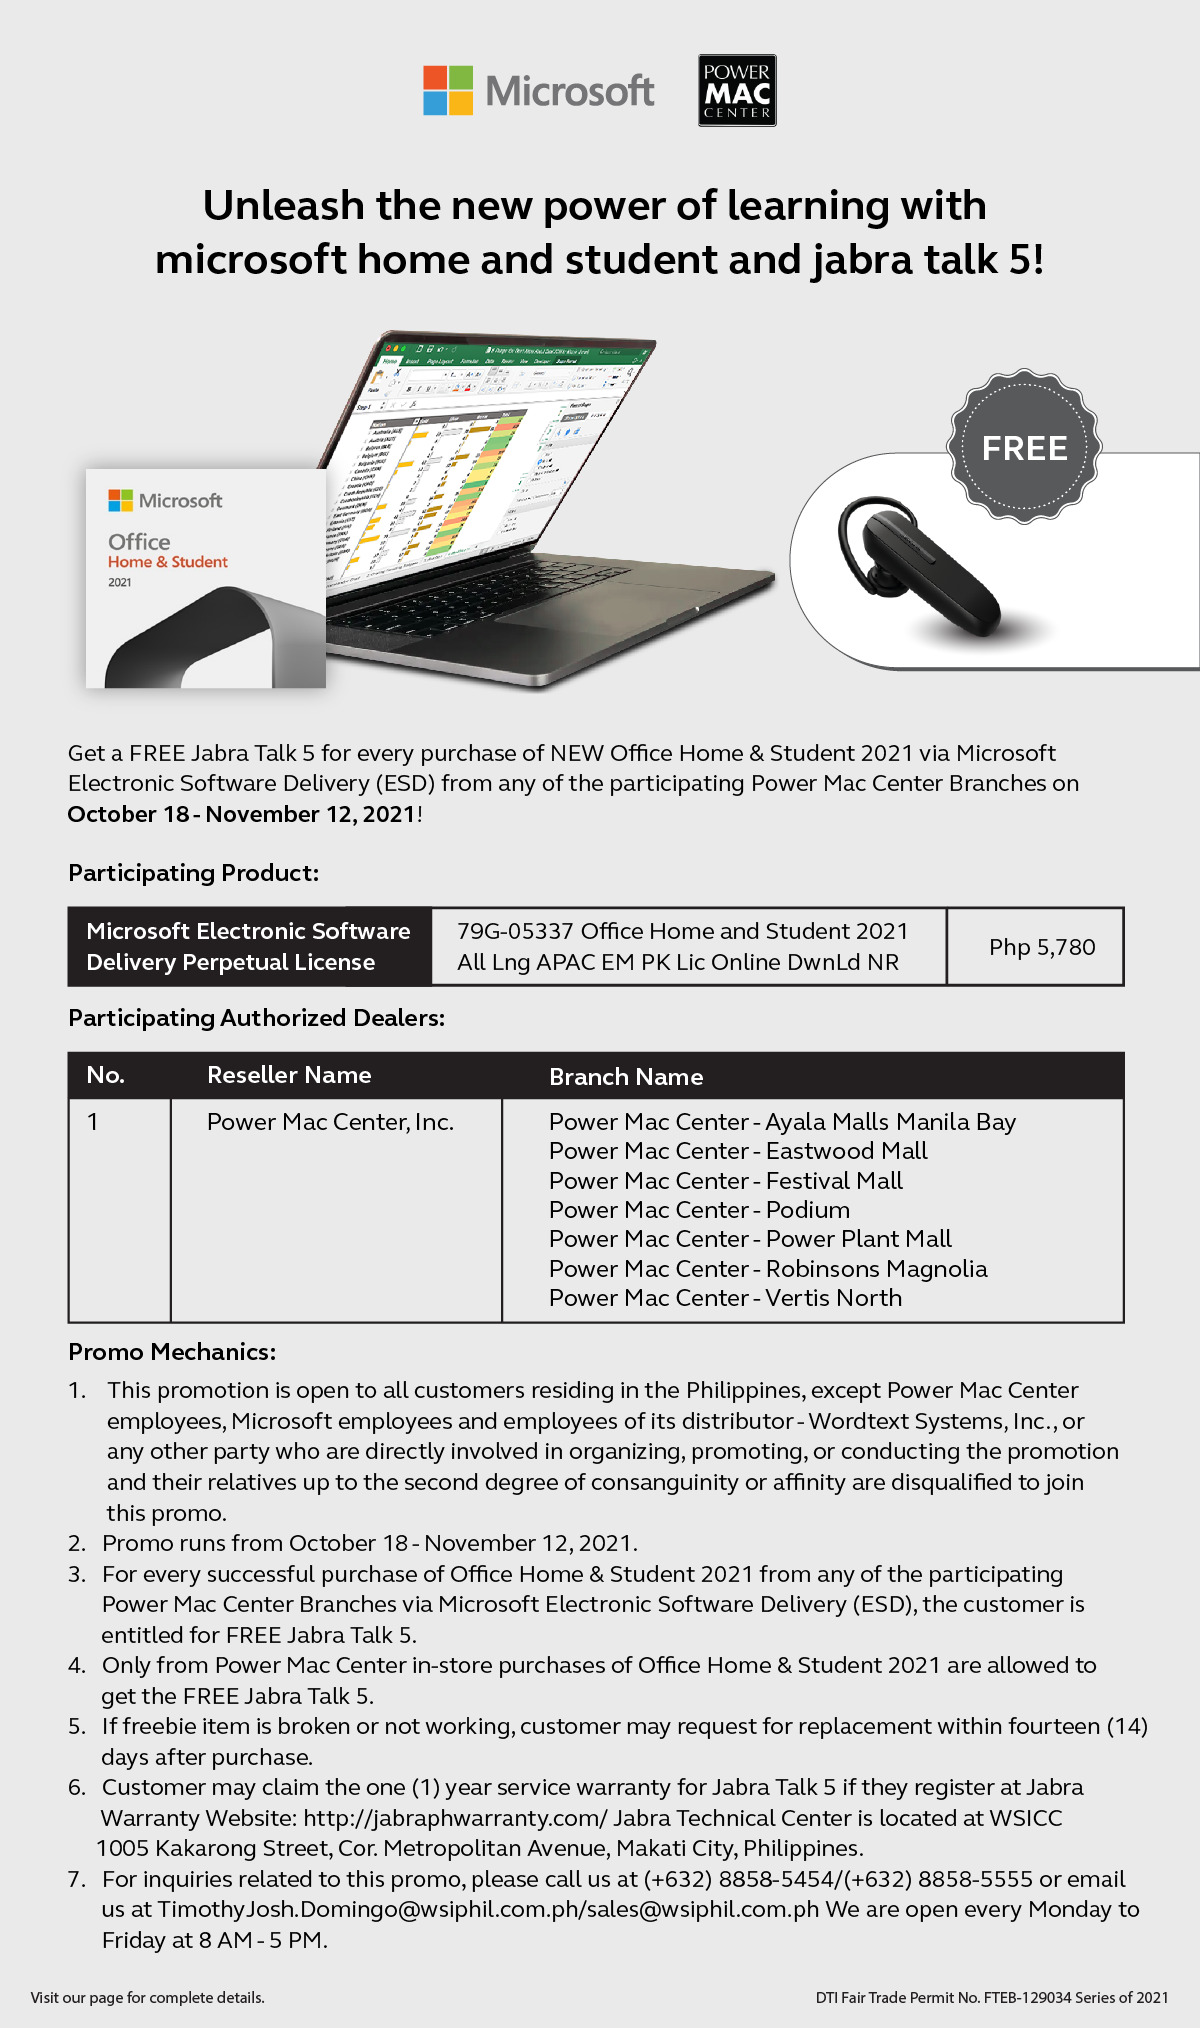 PowerMac Promo of Jabra Talk 5 and Home and Student